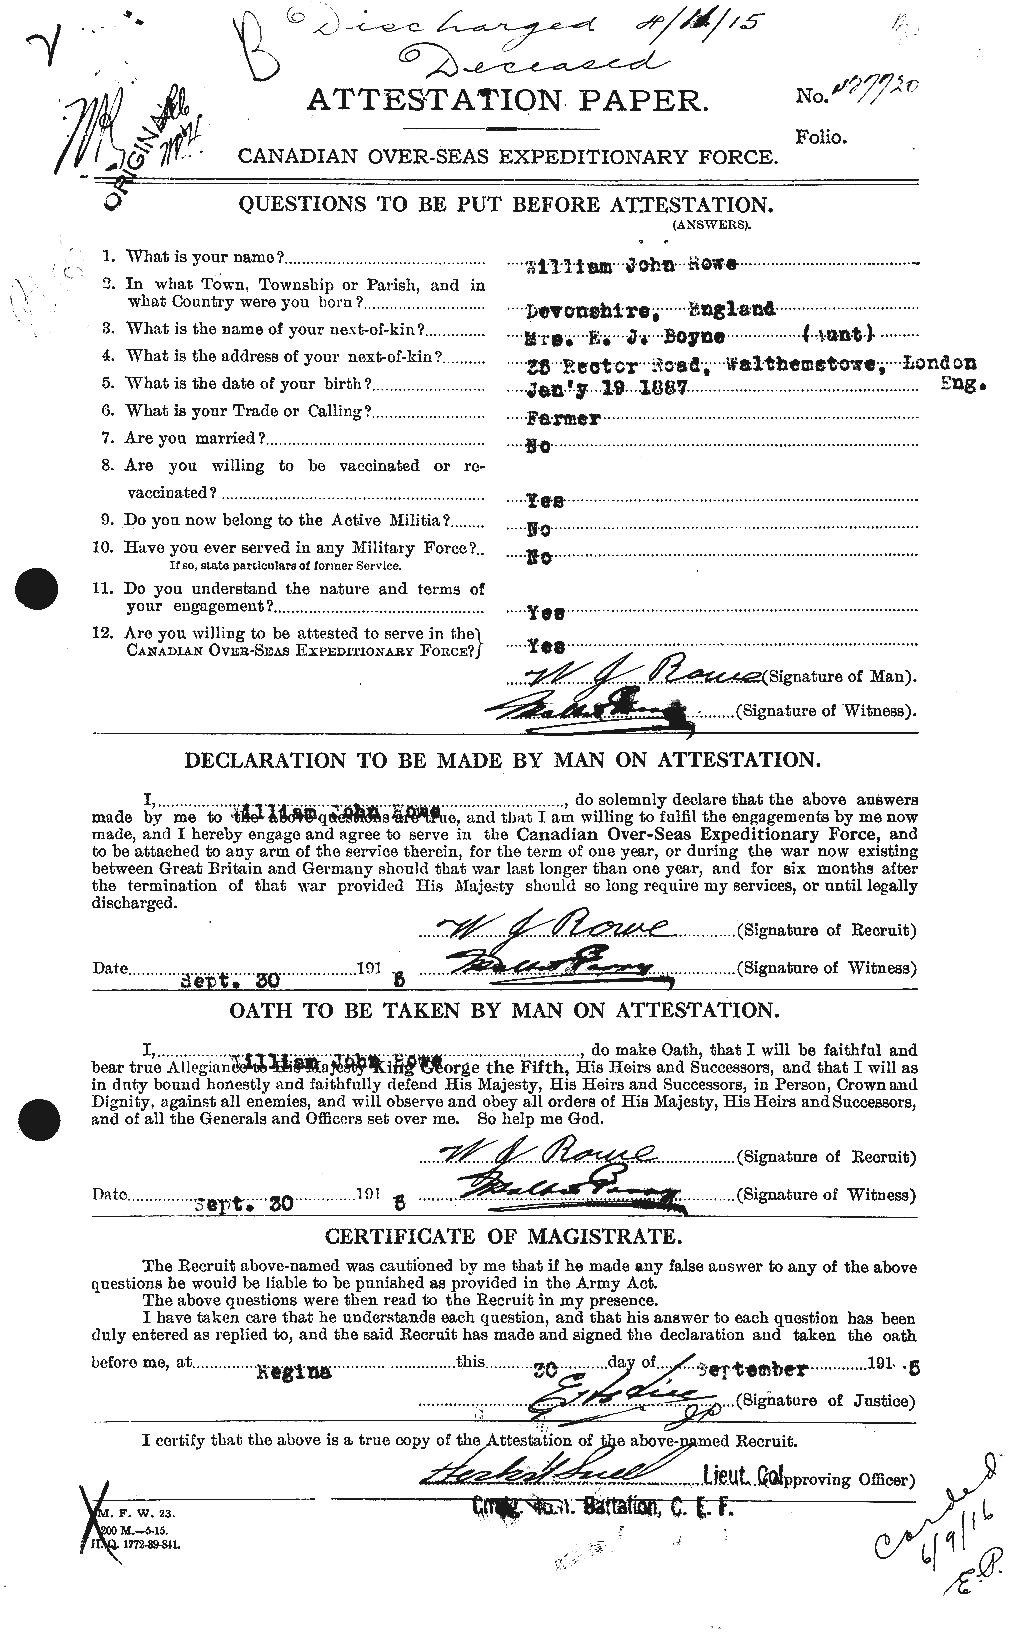 Personnel Records of the First World War - CEF 616036a